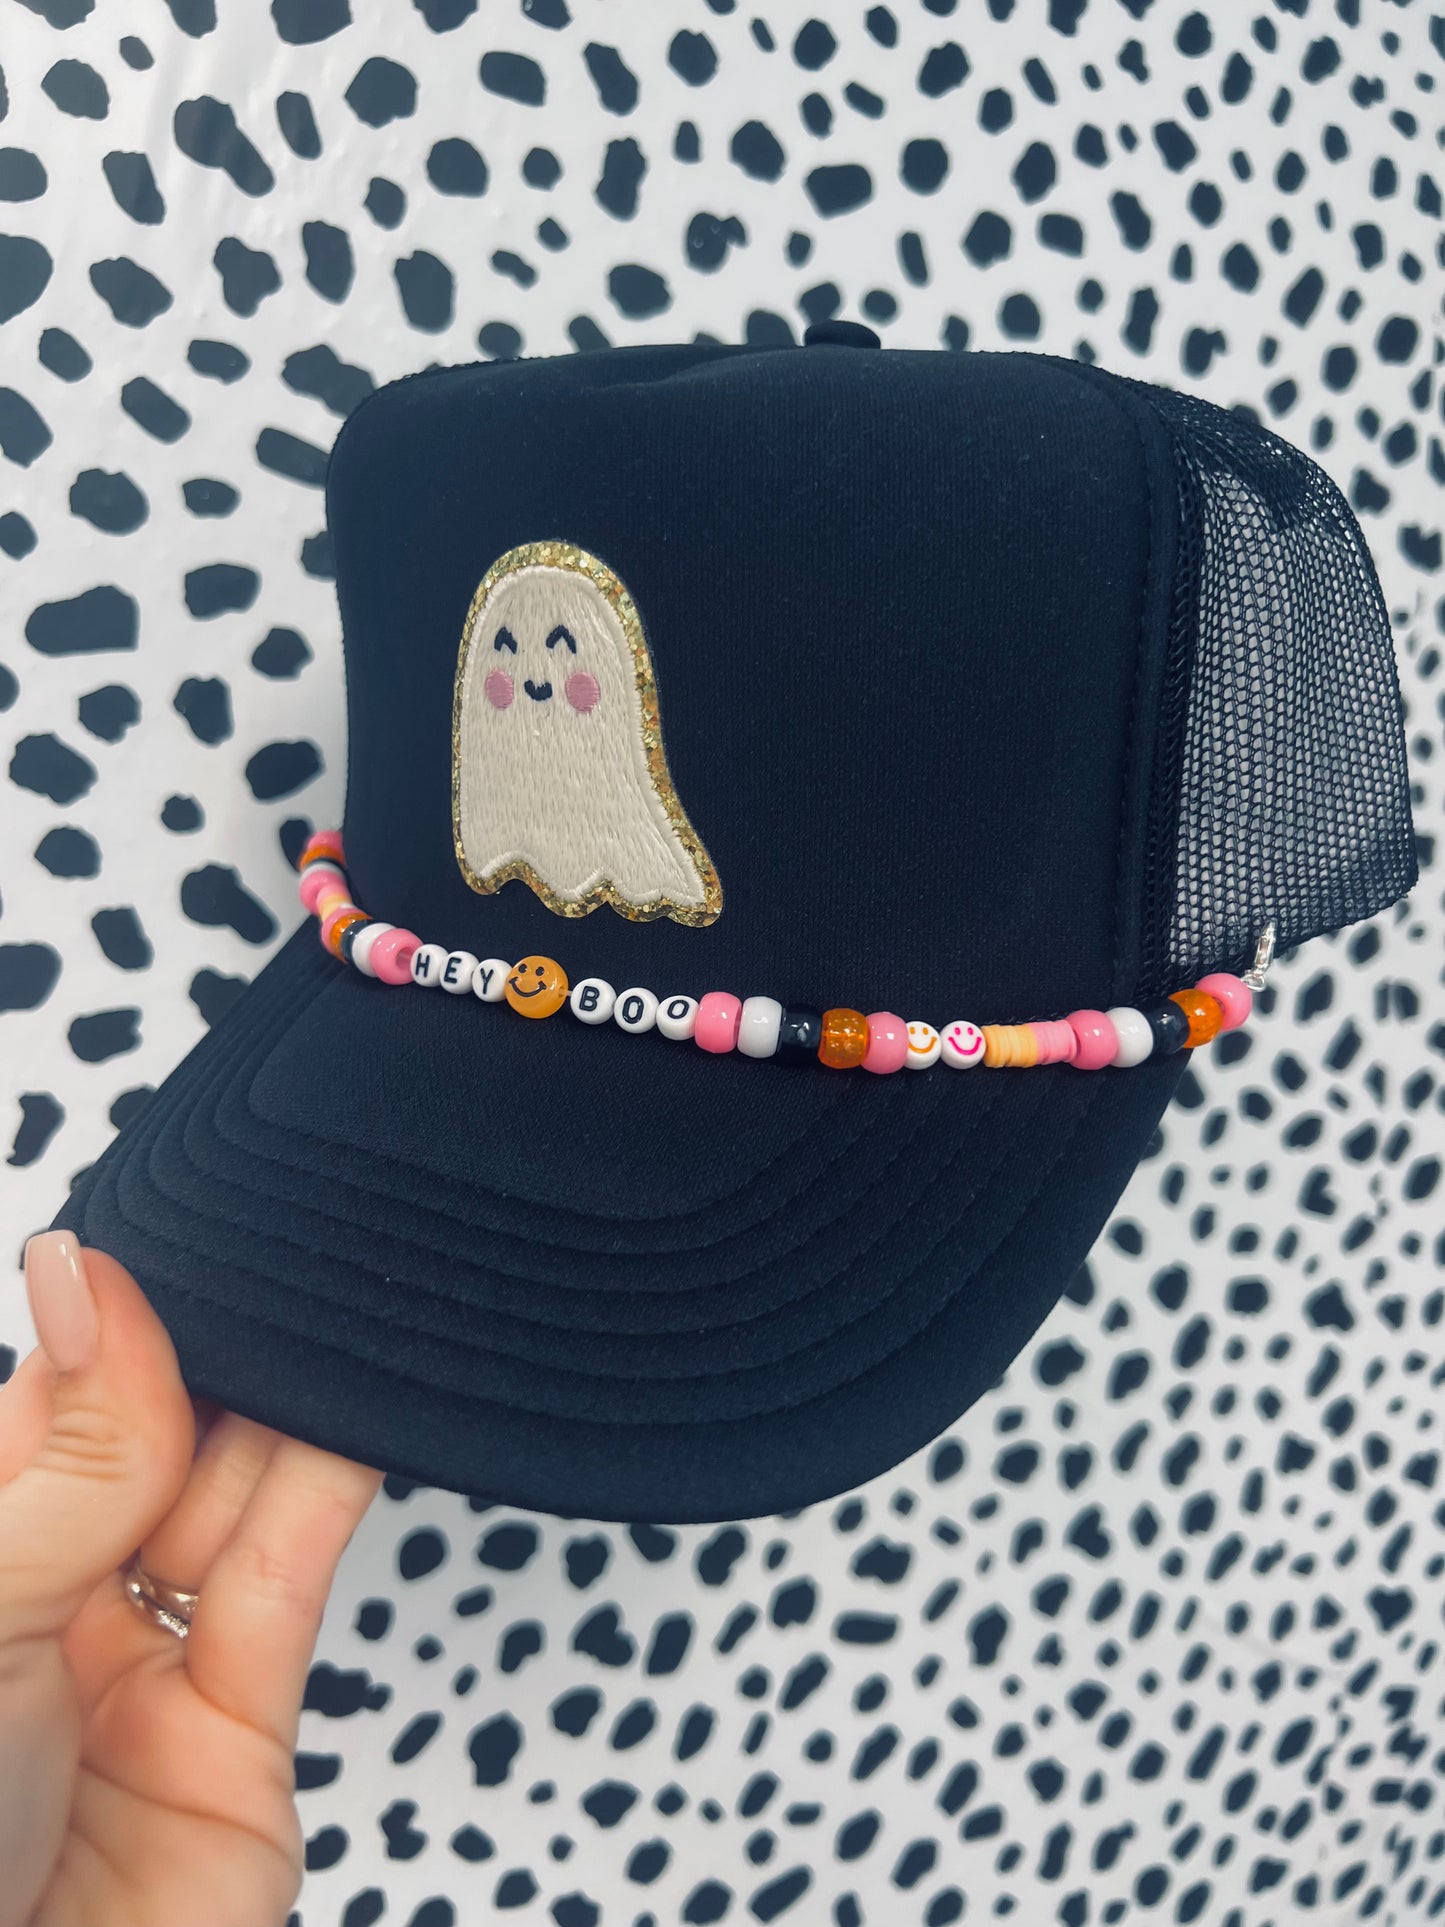 Hey Boo~Groovy Ghost Trucker hat with Hat Charm